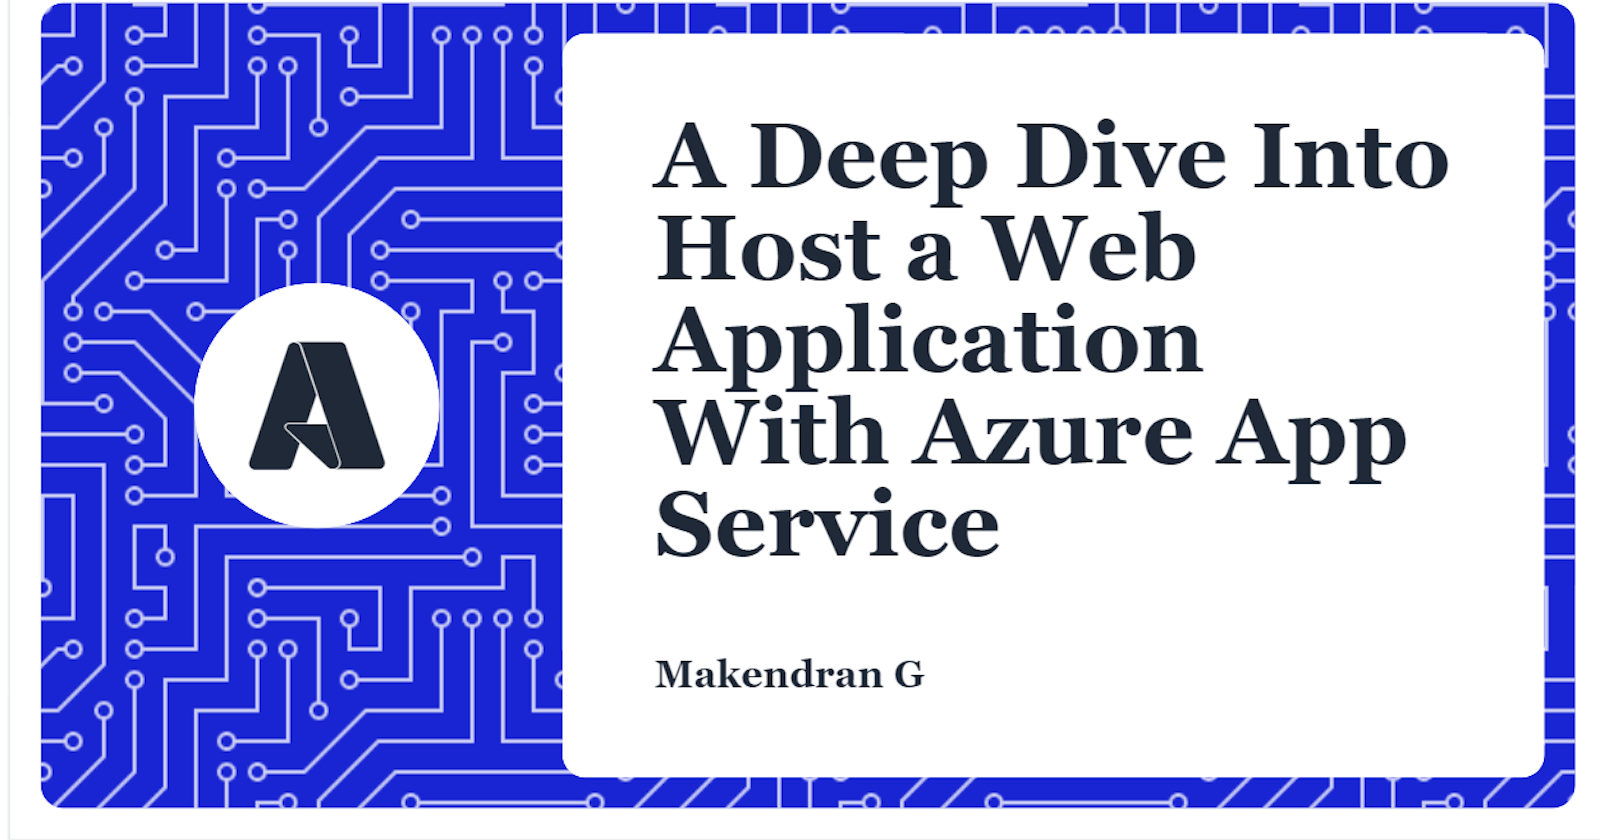 A Deep Dive Into Host a Web Application With Azure App Service